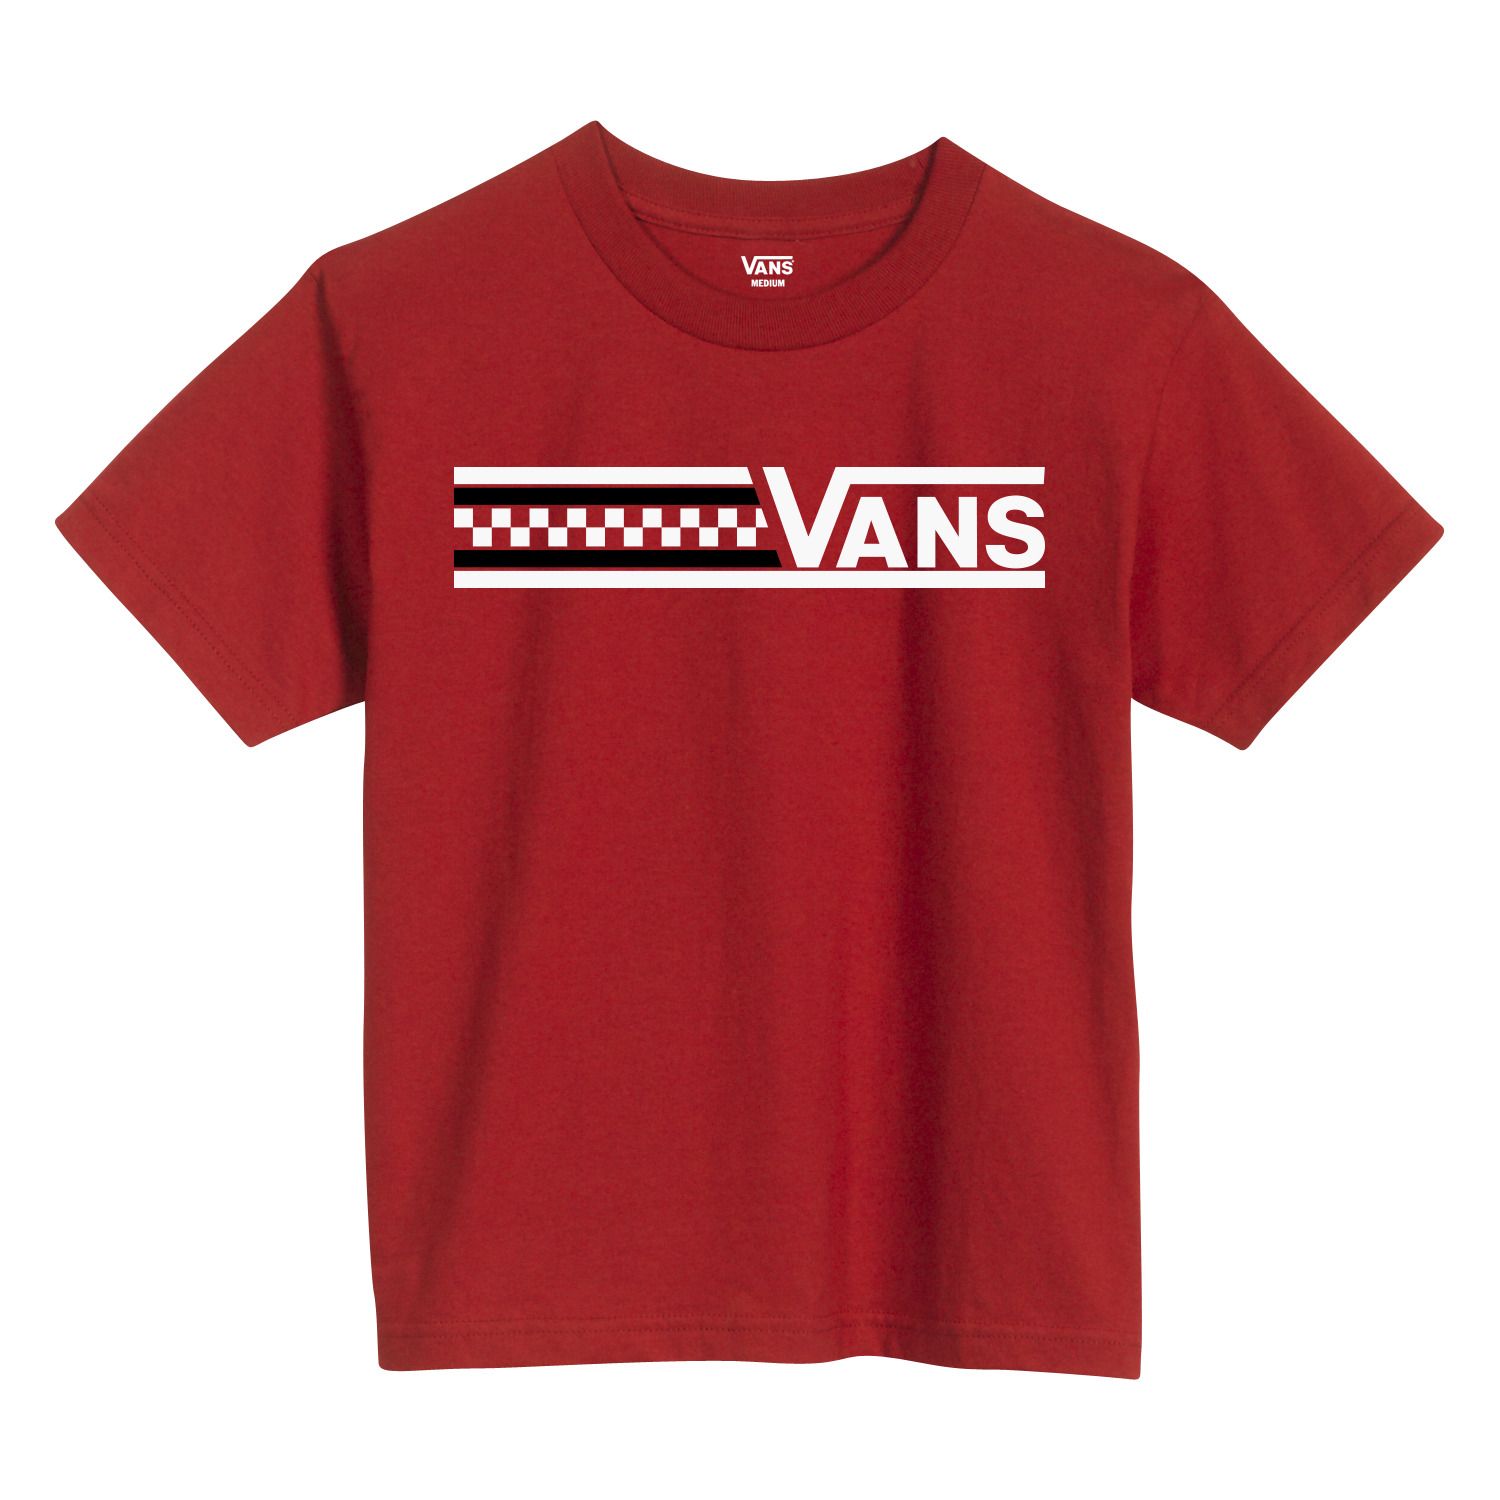 Boys 8-20 Vans® Red Checkered Graphic Tee